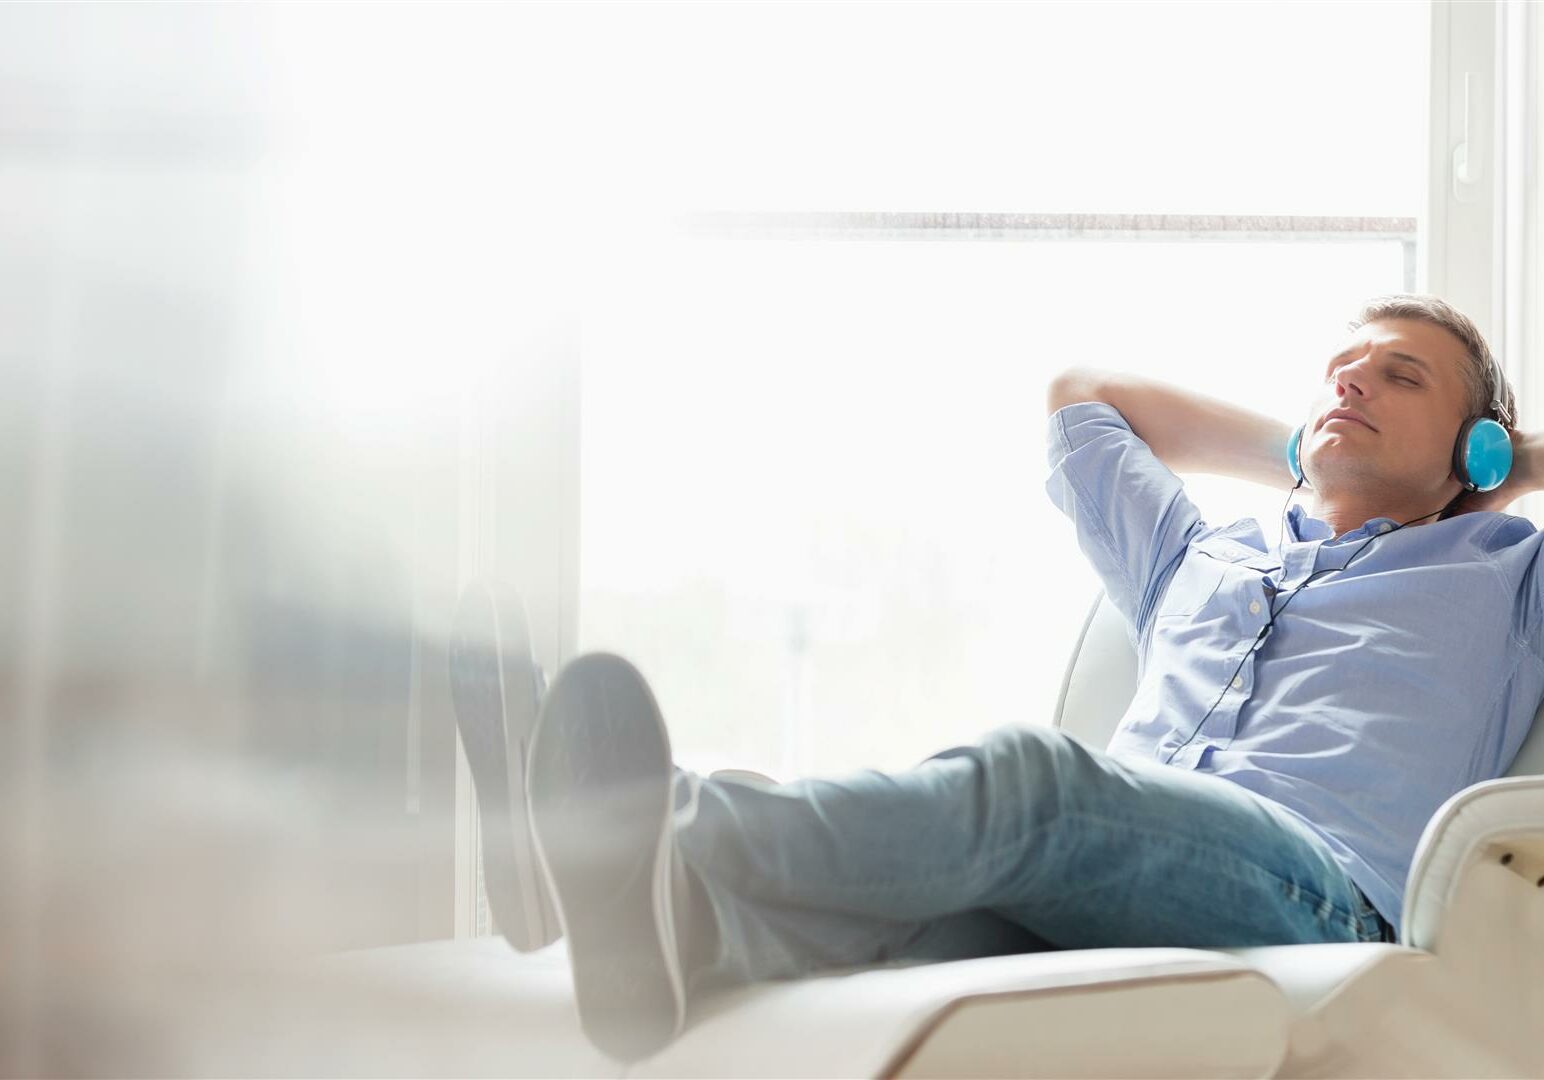 Man relaxing listening to music